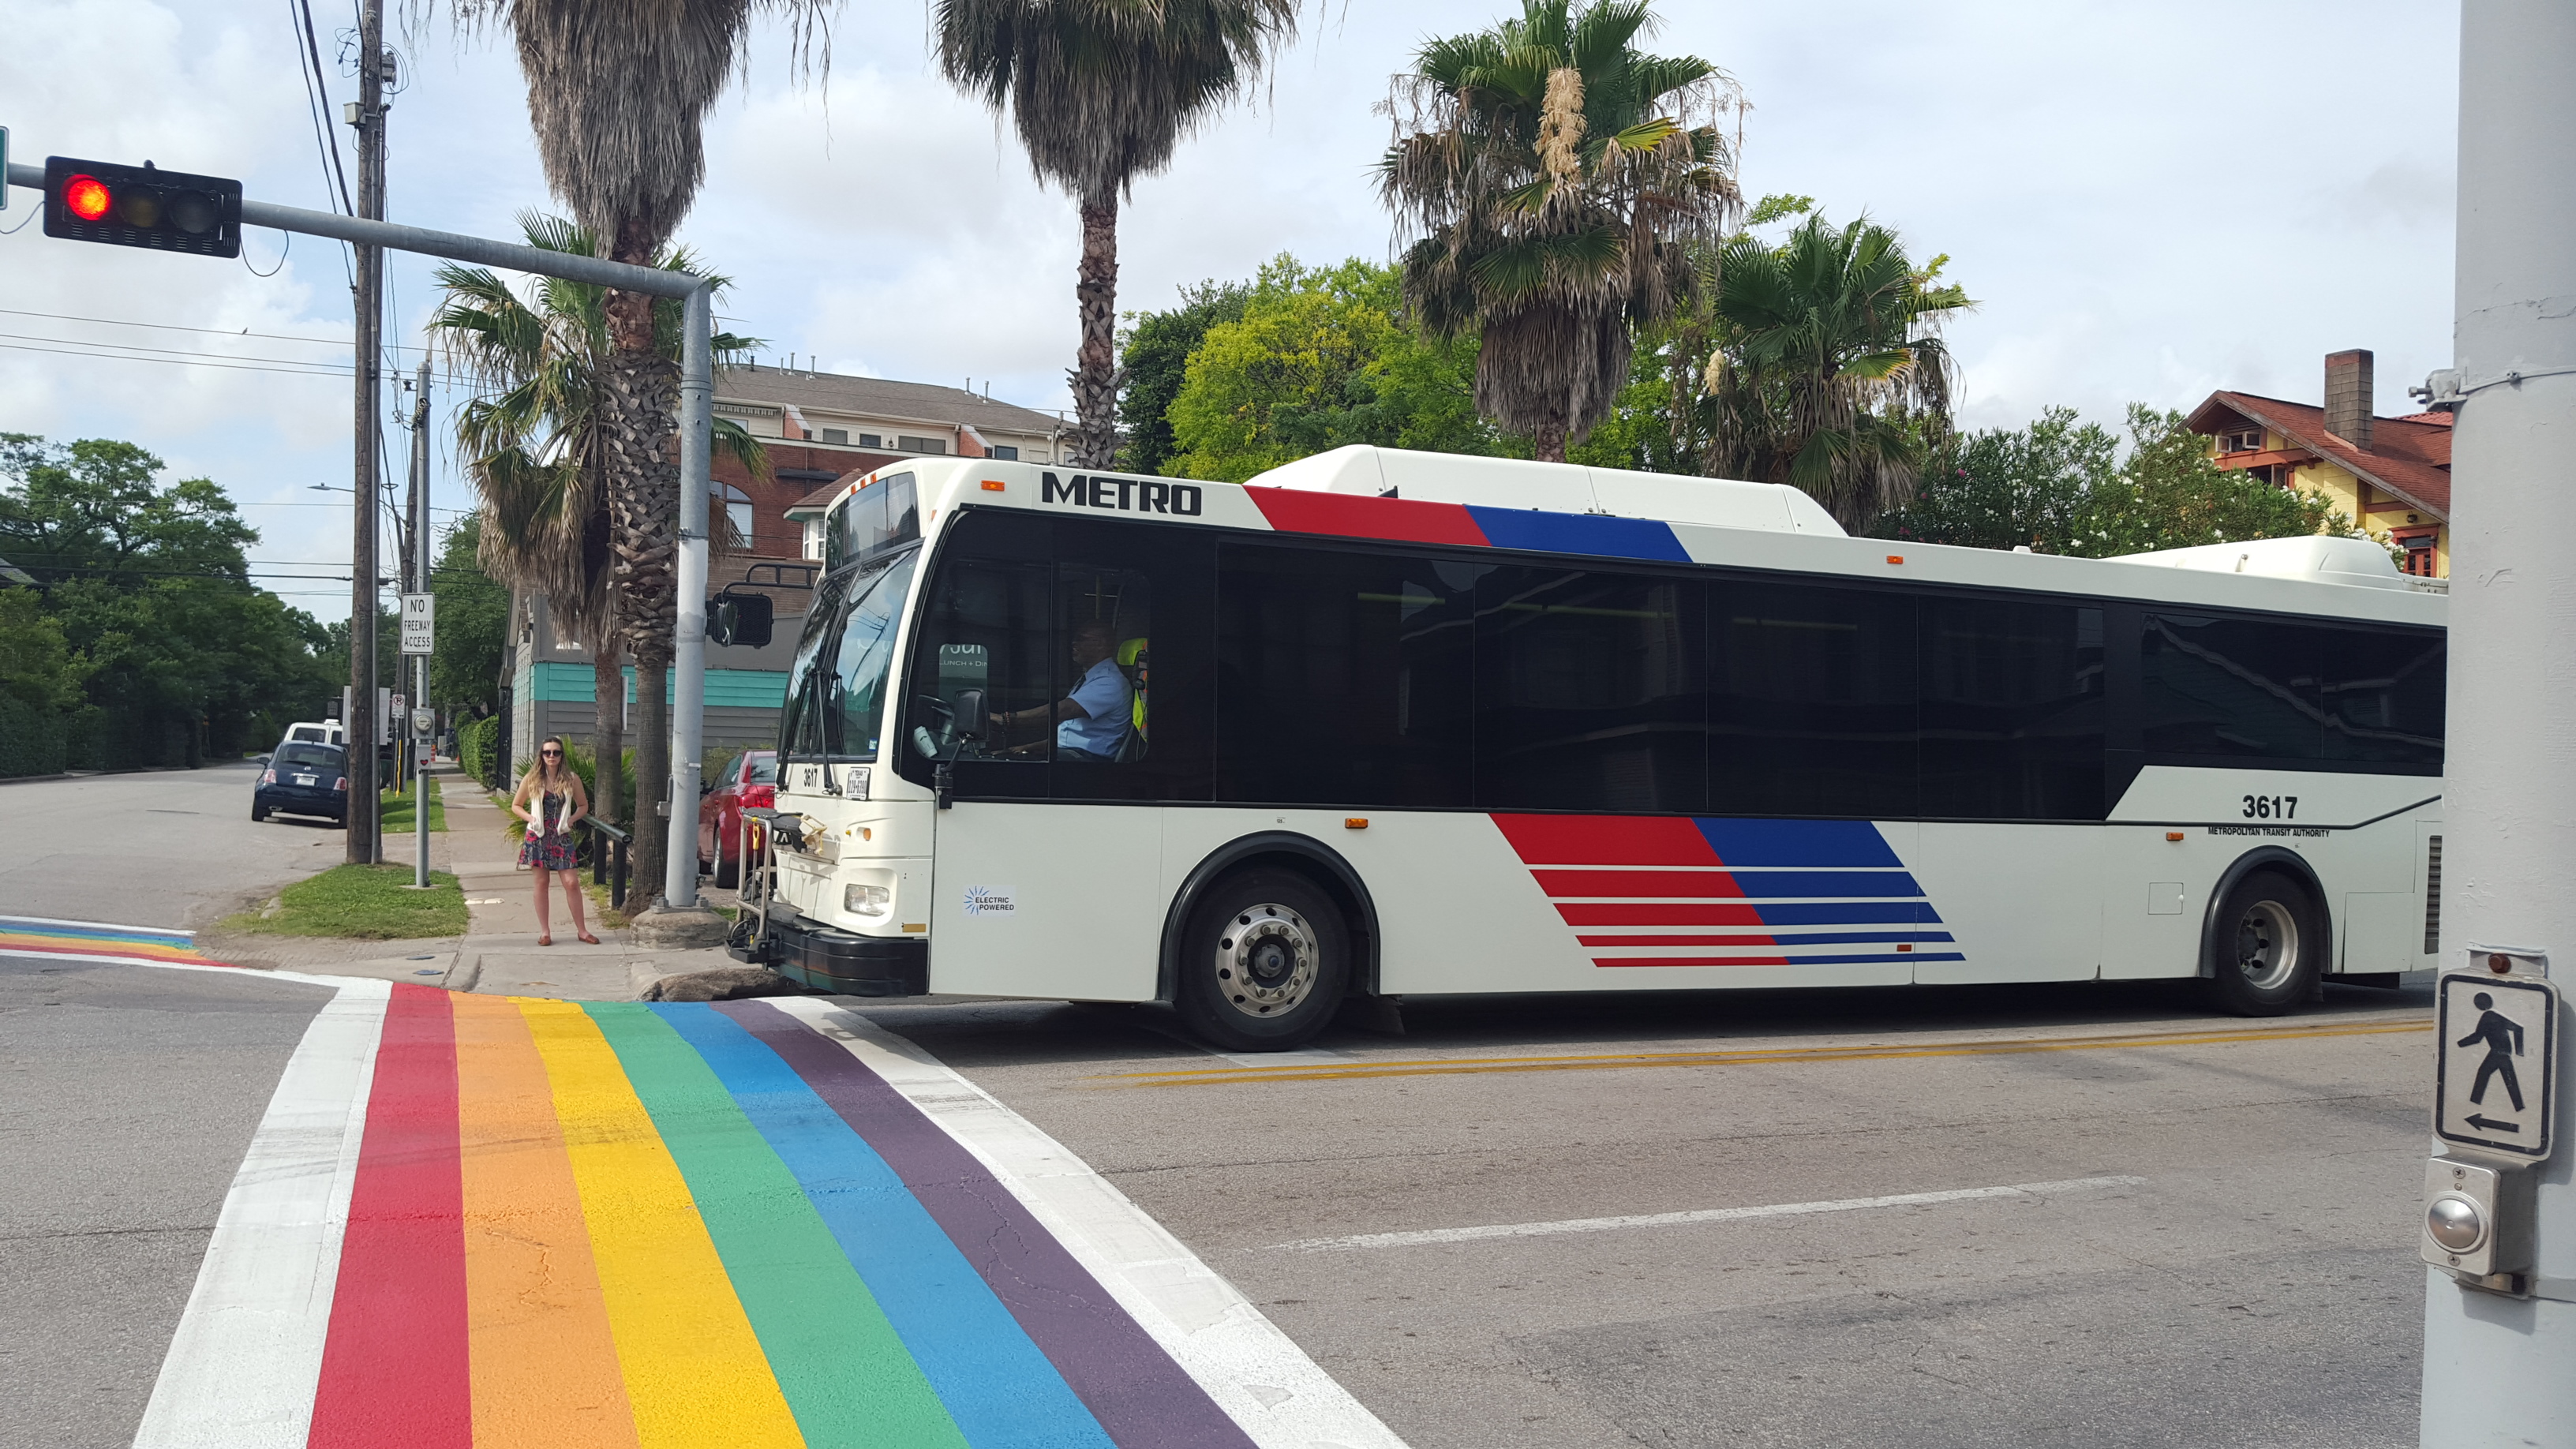 A METRO bus and a pedestrian at the rainbow crosswalk in Montrose.